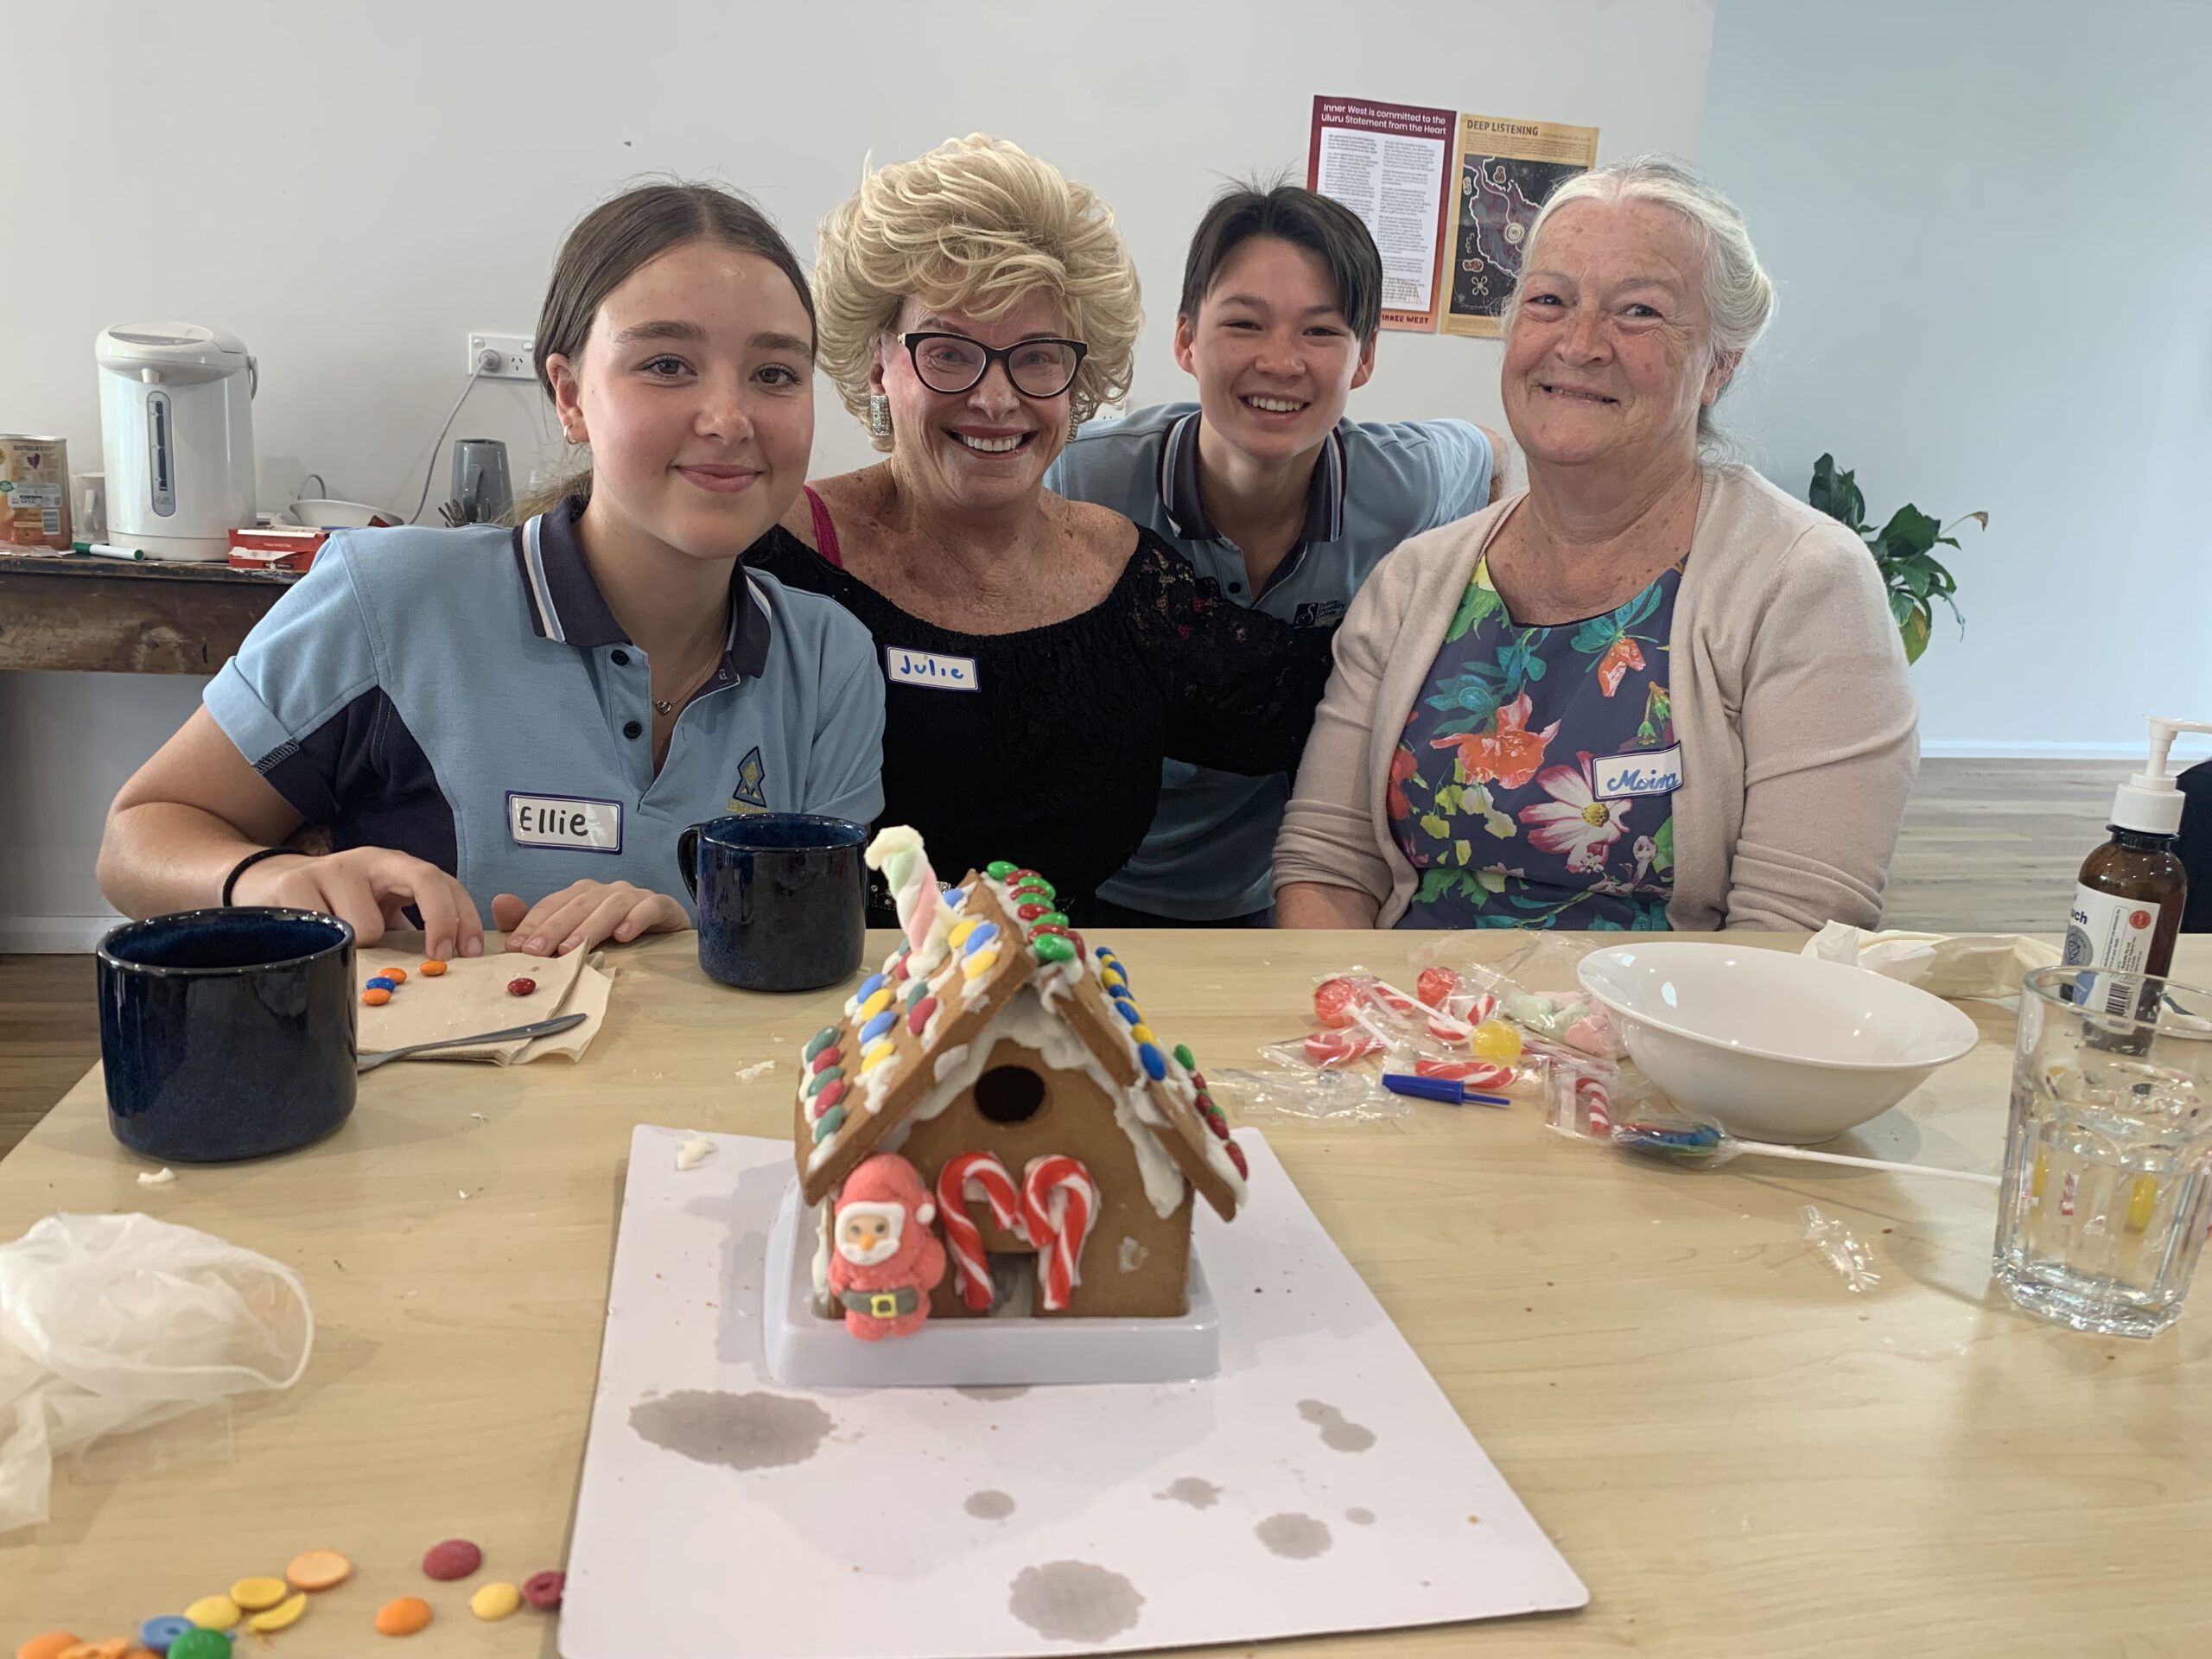 Together2's Intergenerational Program builds connections across generations